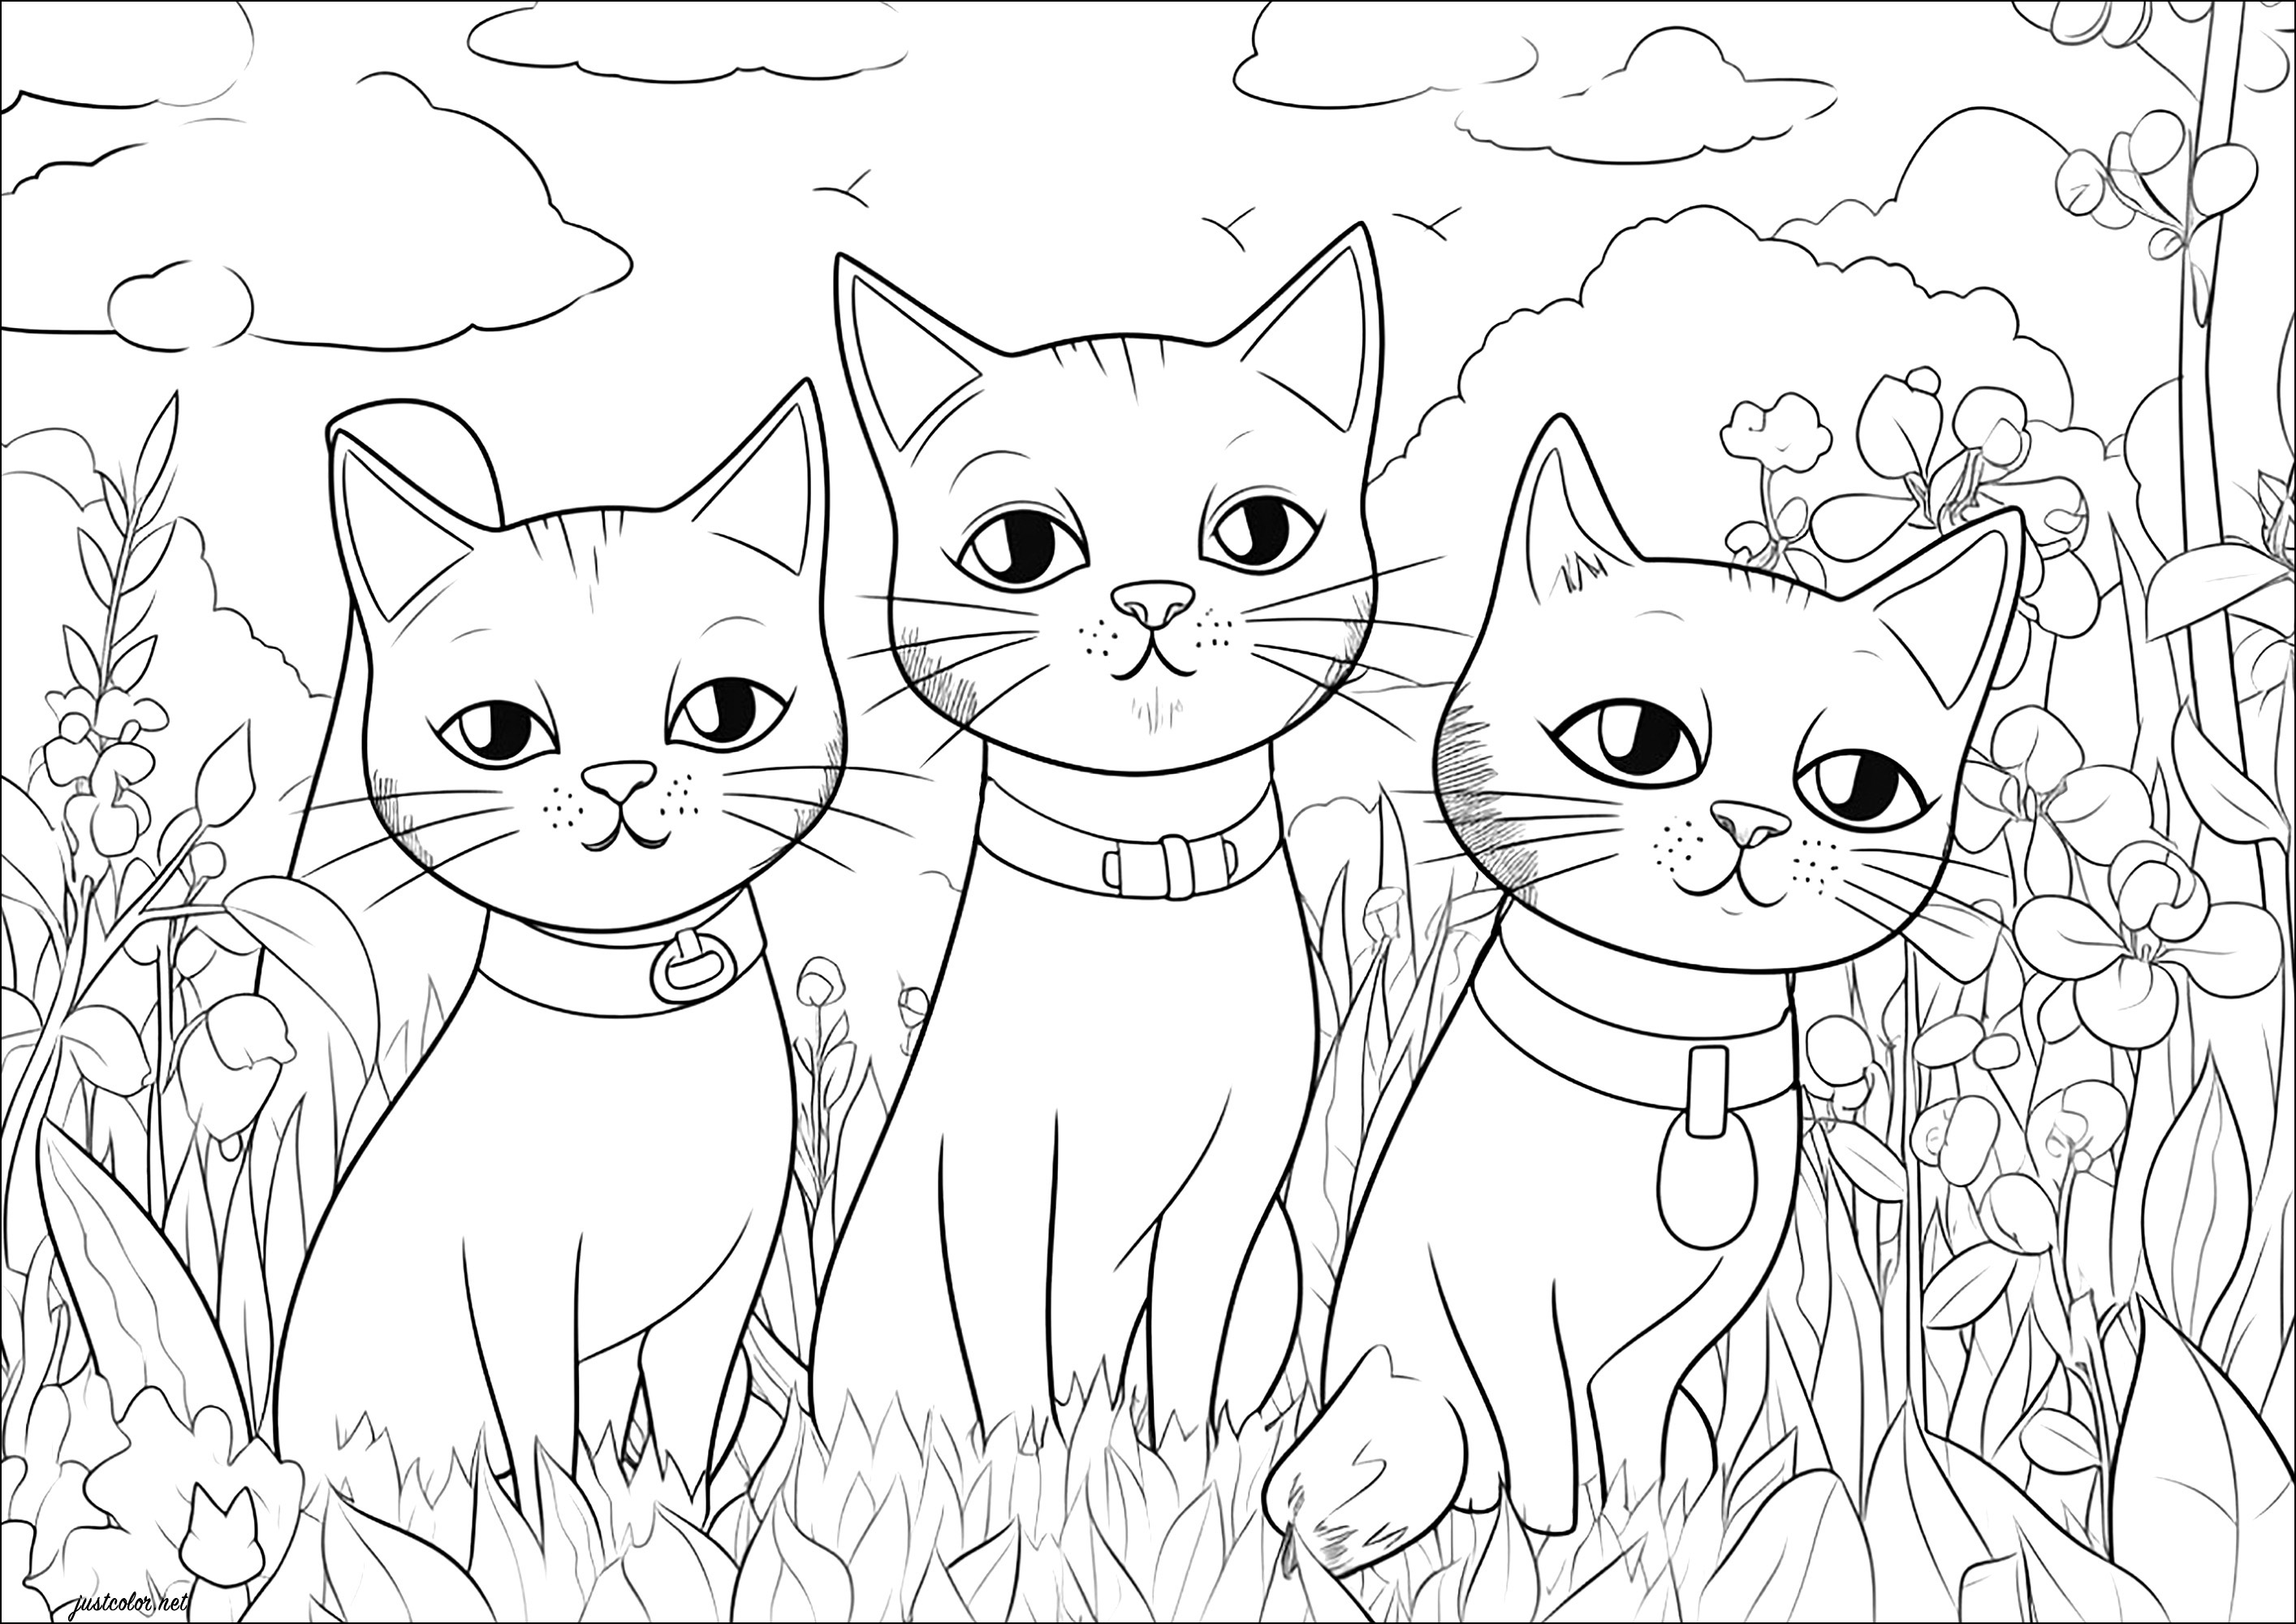 Three cats staring at you. Three pretty cats with a disdainful look, and lots of plants to color in the background.